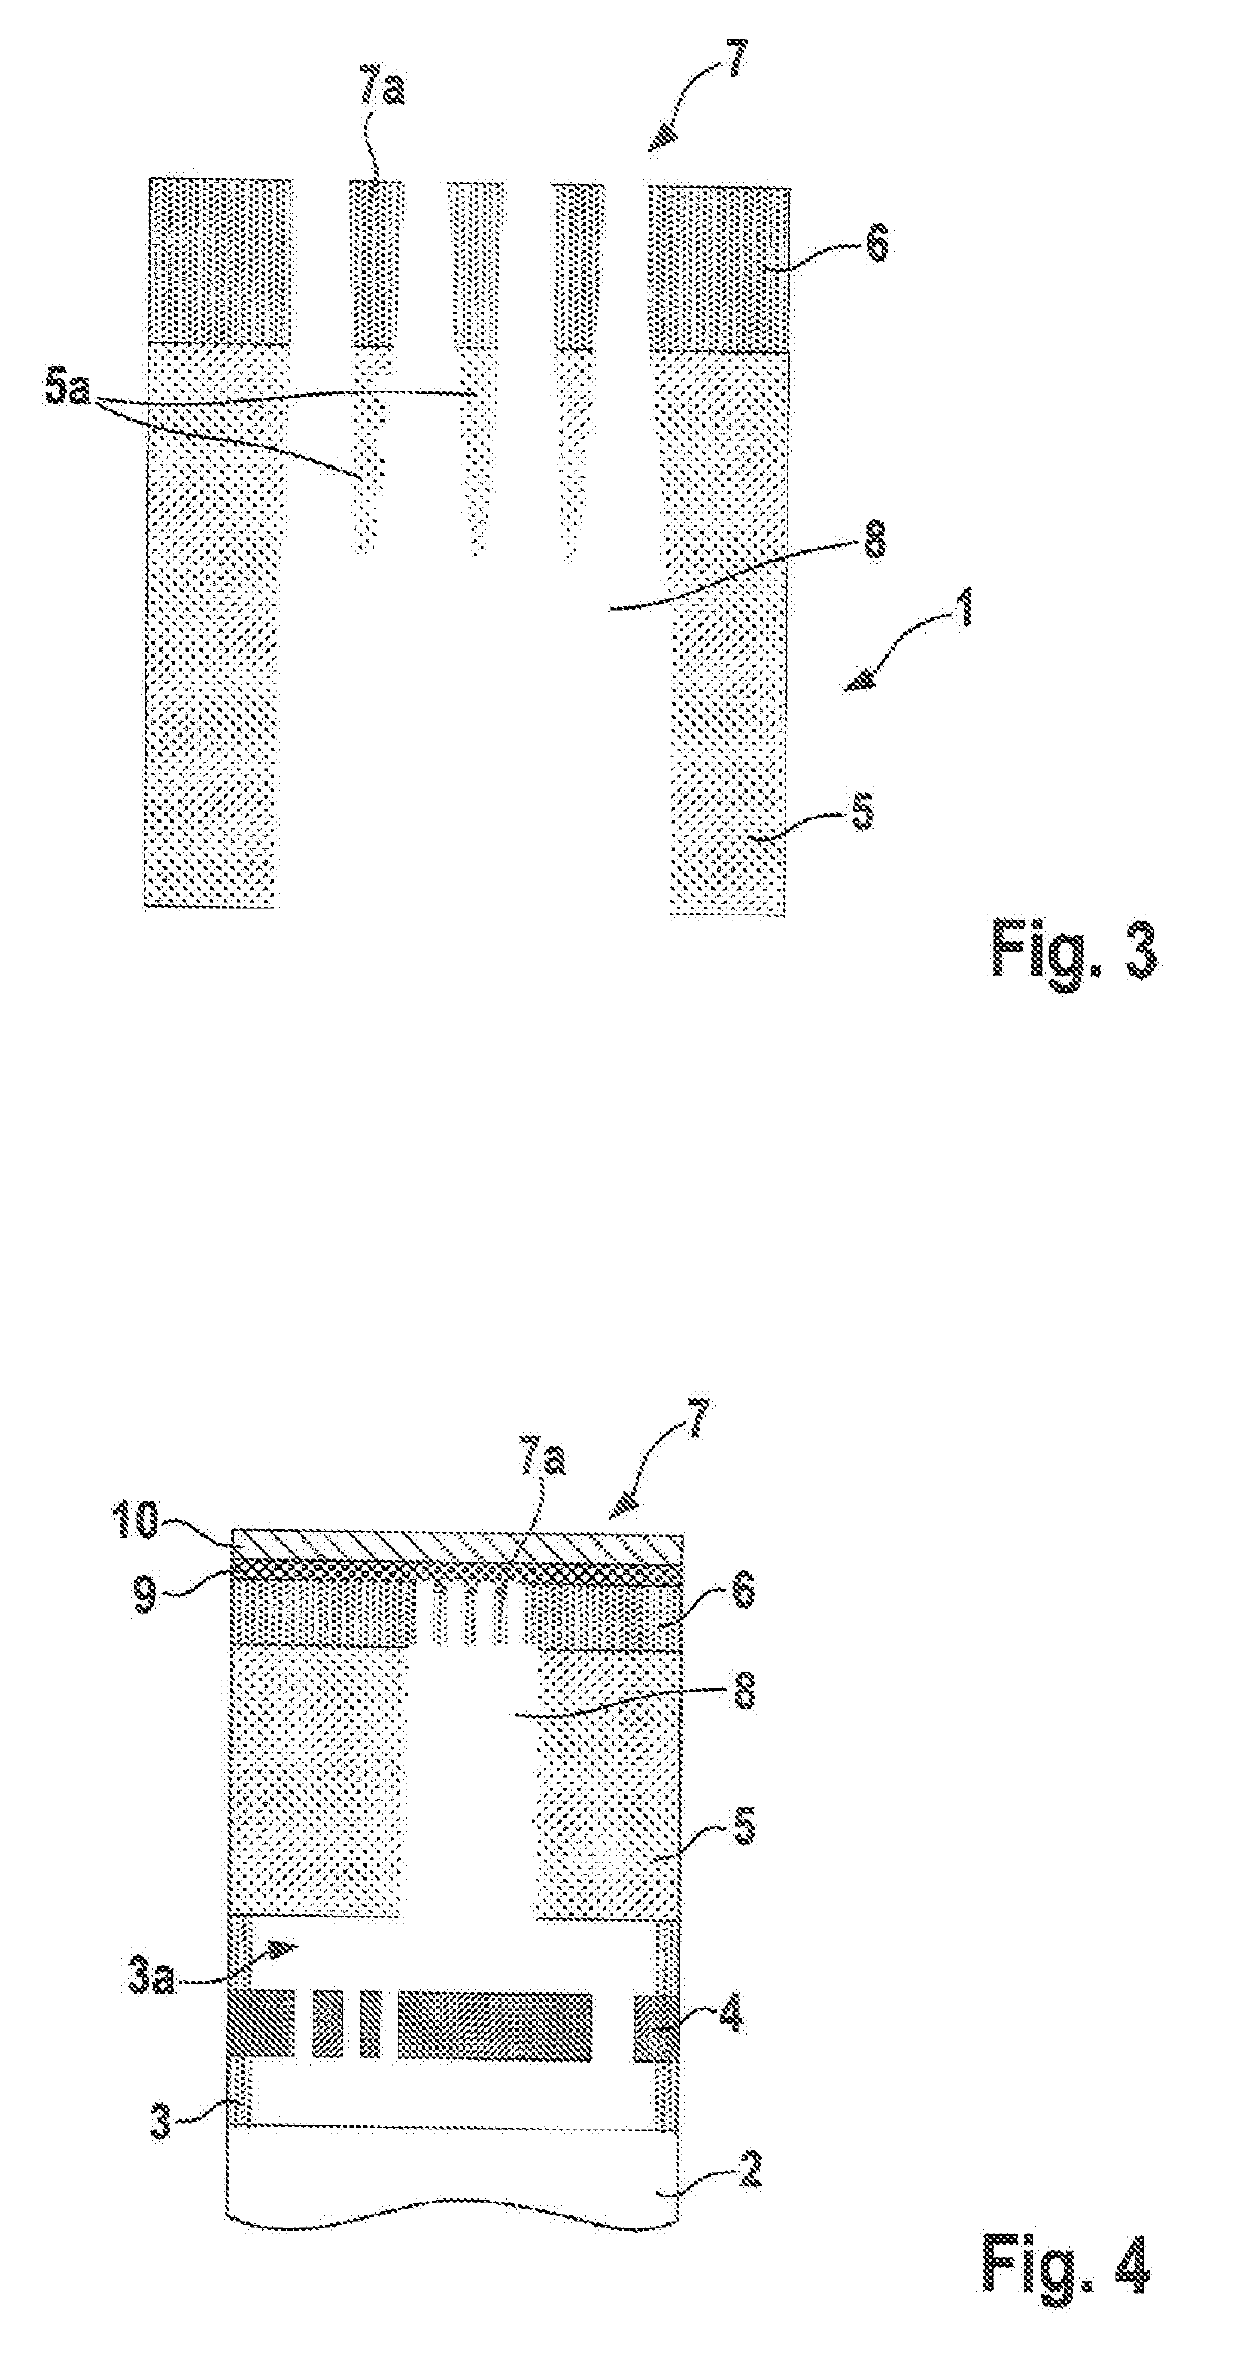 Method for Producing a Micromechanical Element